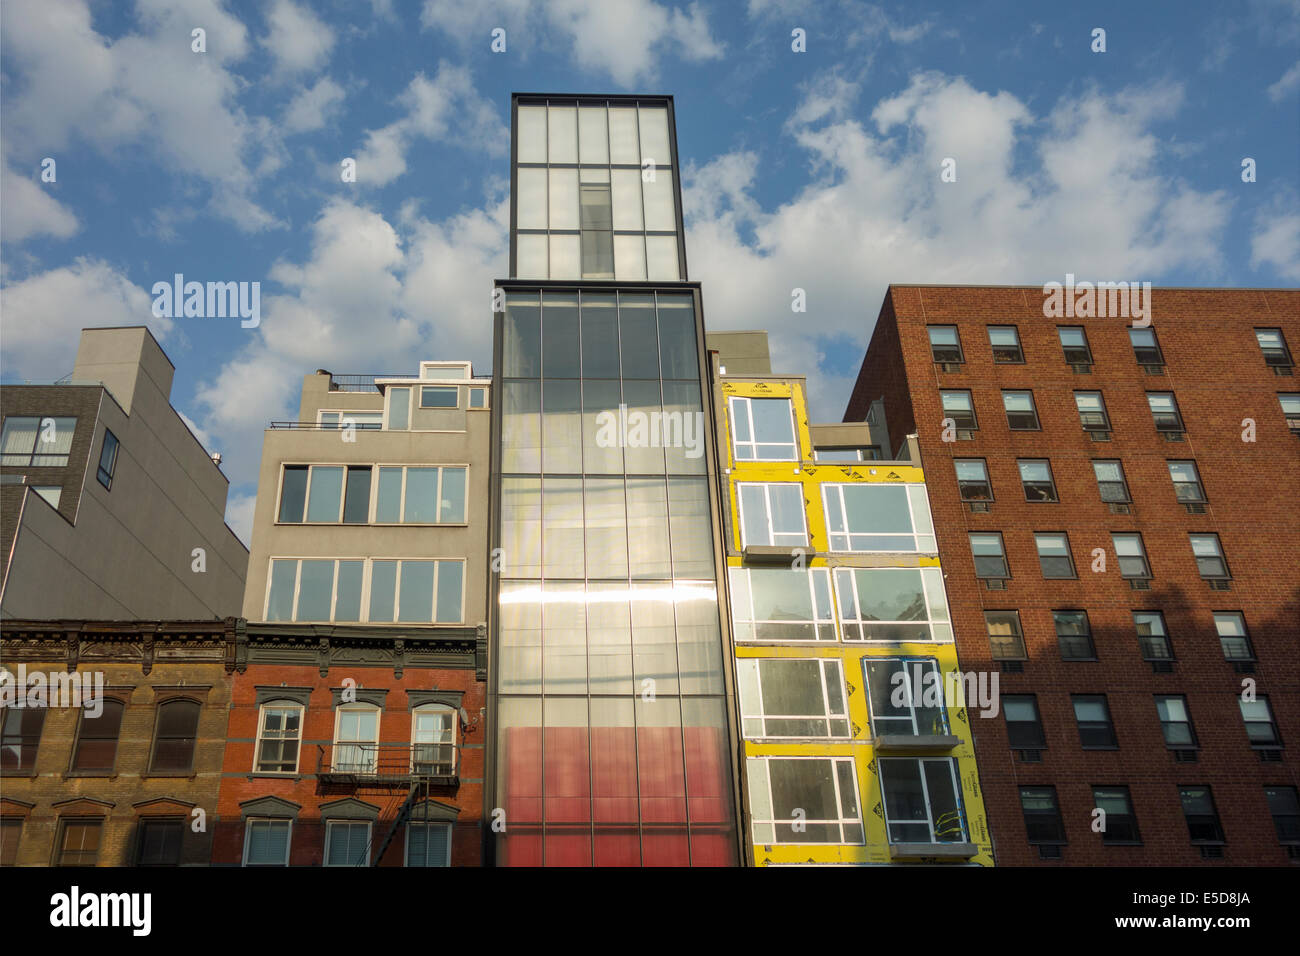 Manhattan Lower East Side buildings in NYC Stock Photo